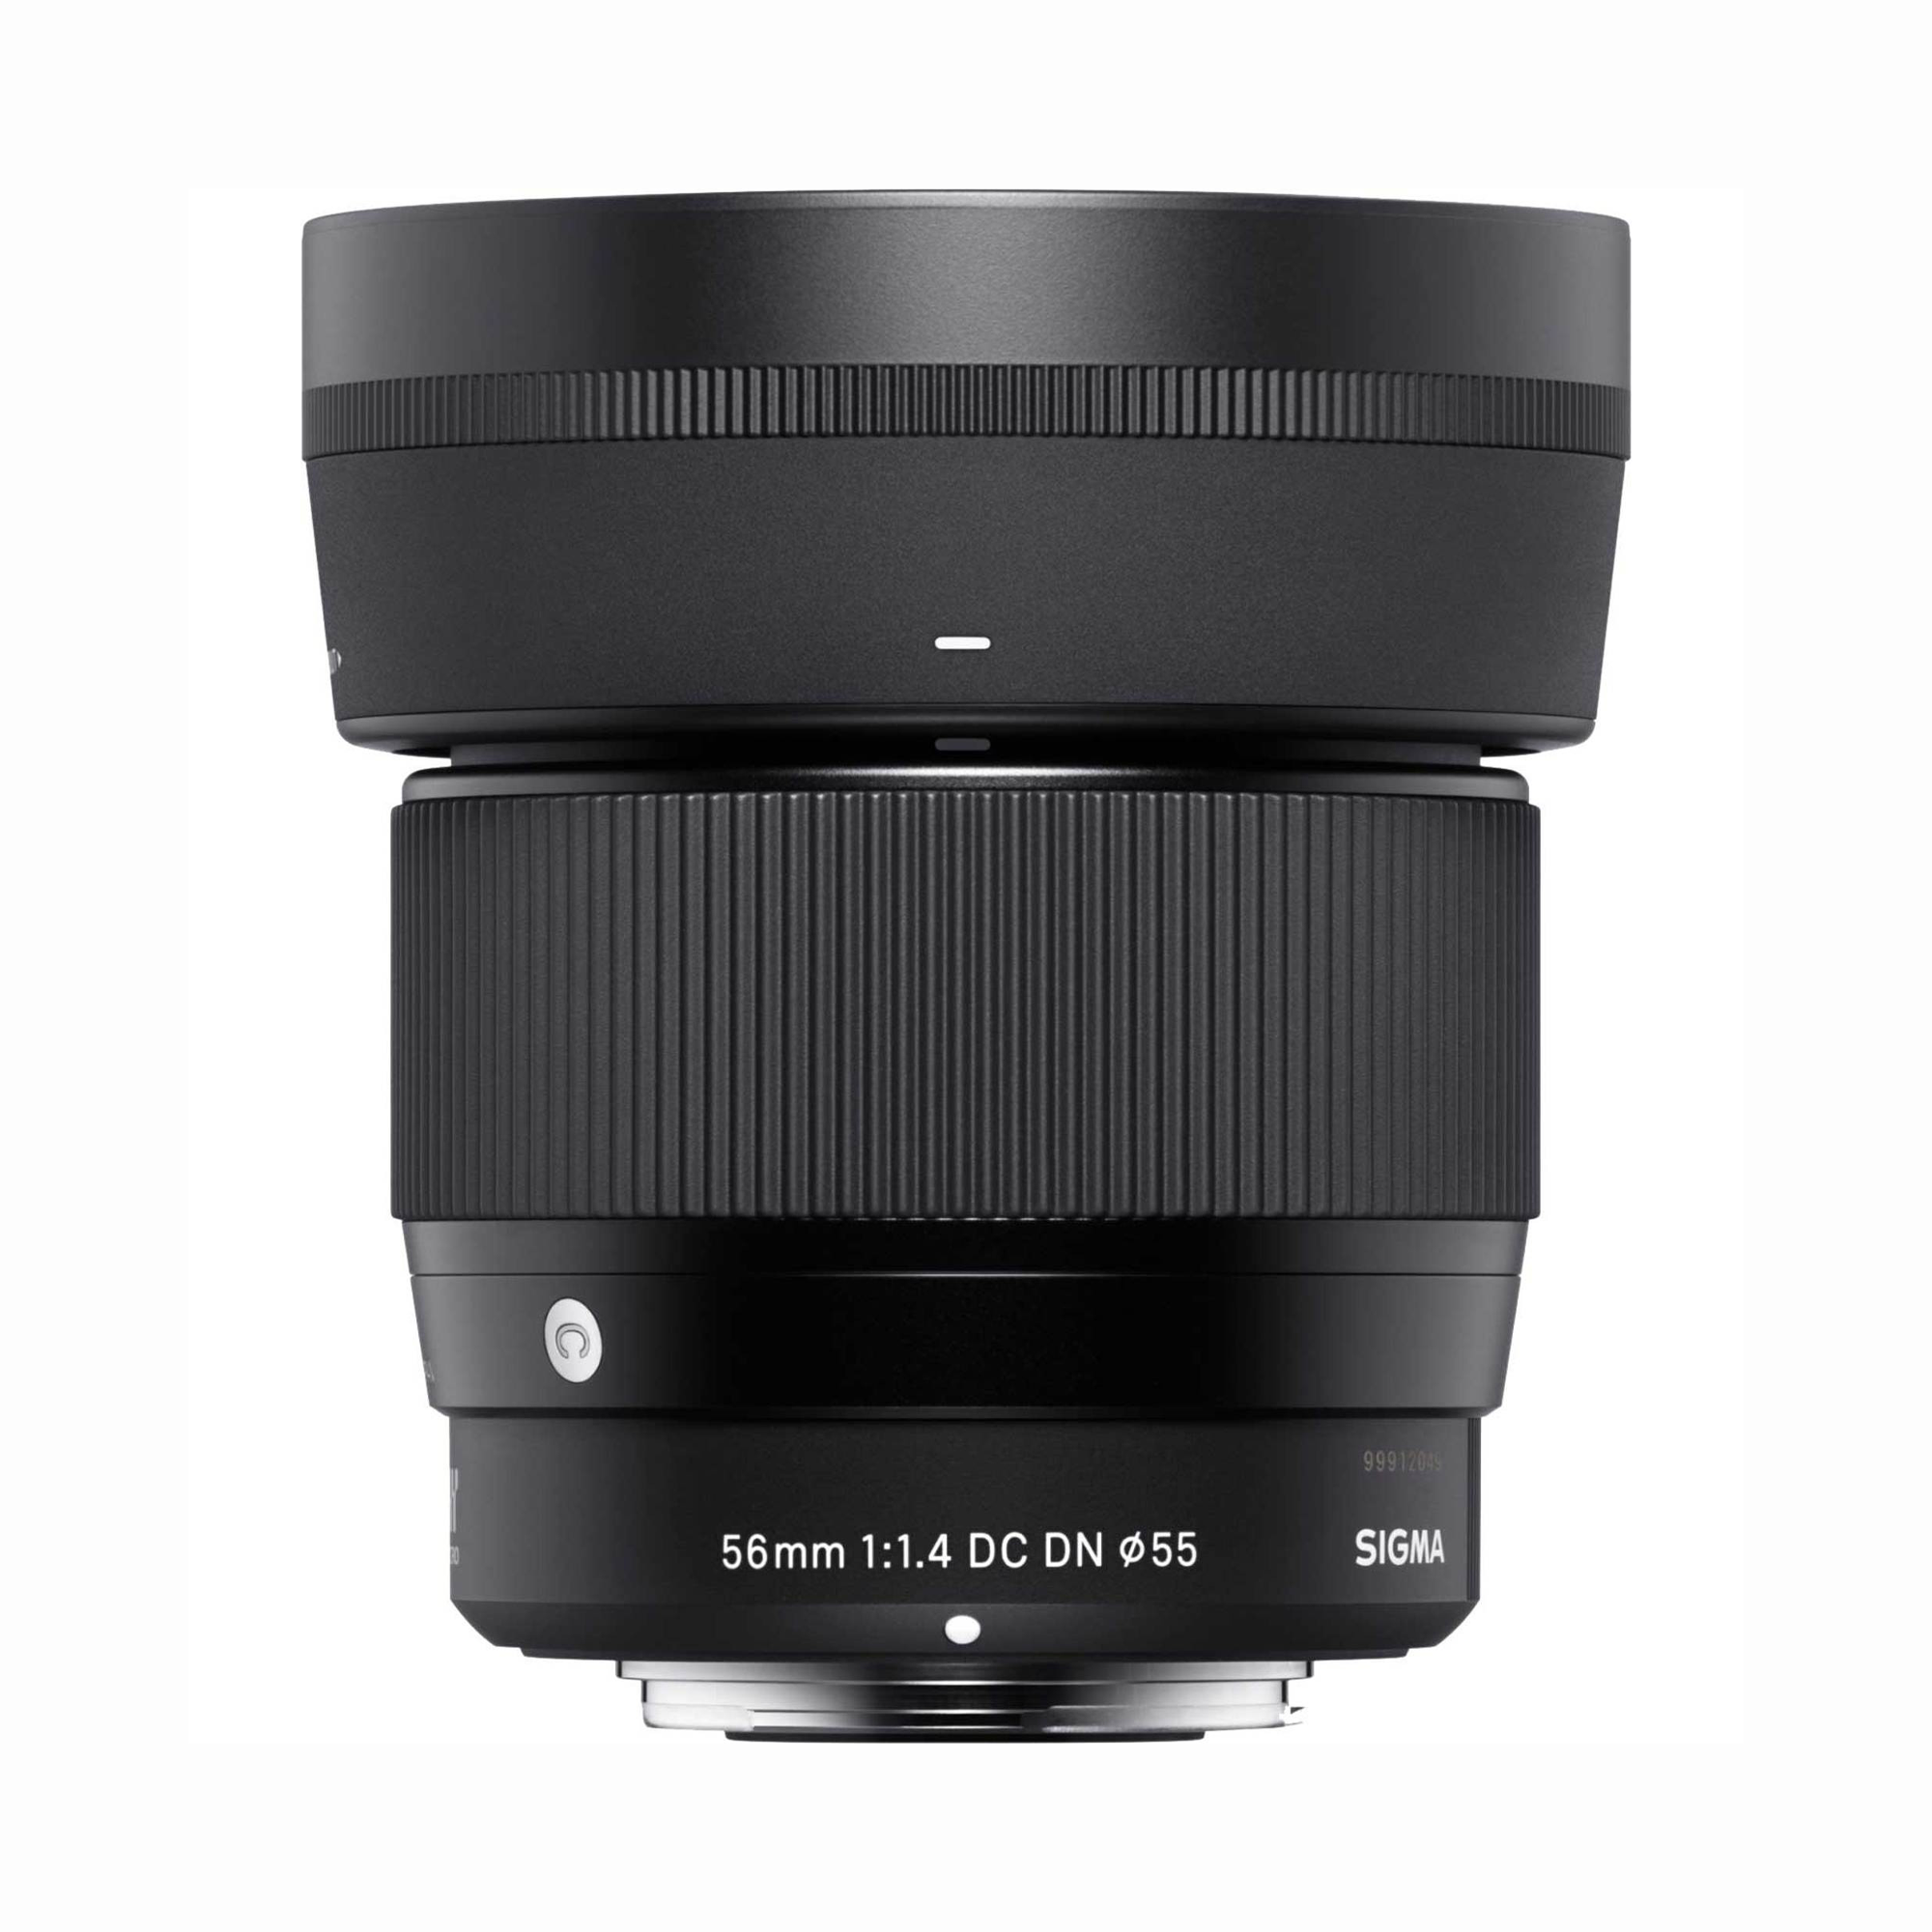 Sigma 56mm F1.4 DC DN HSM Contemporary Lens for L-mount